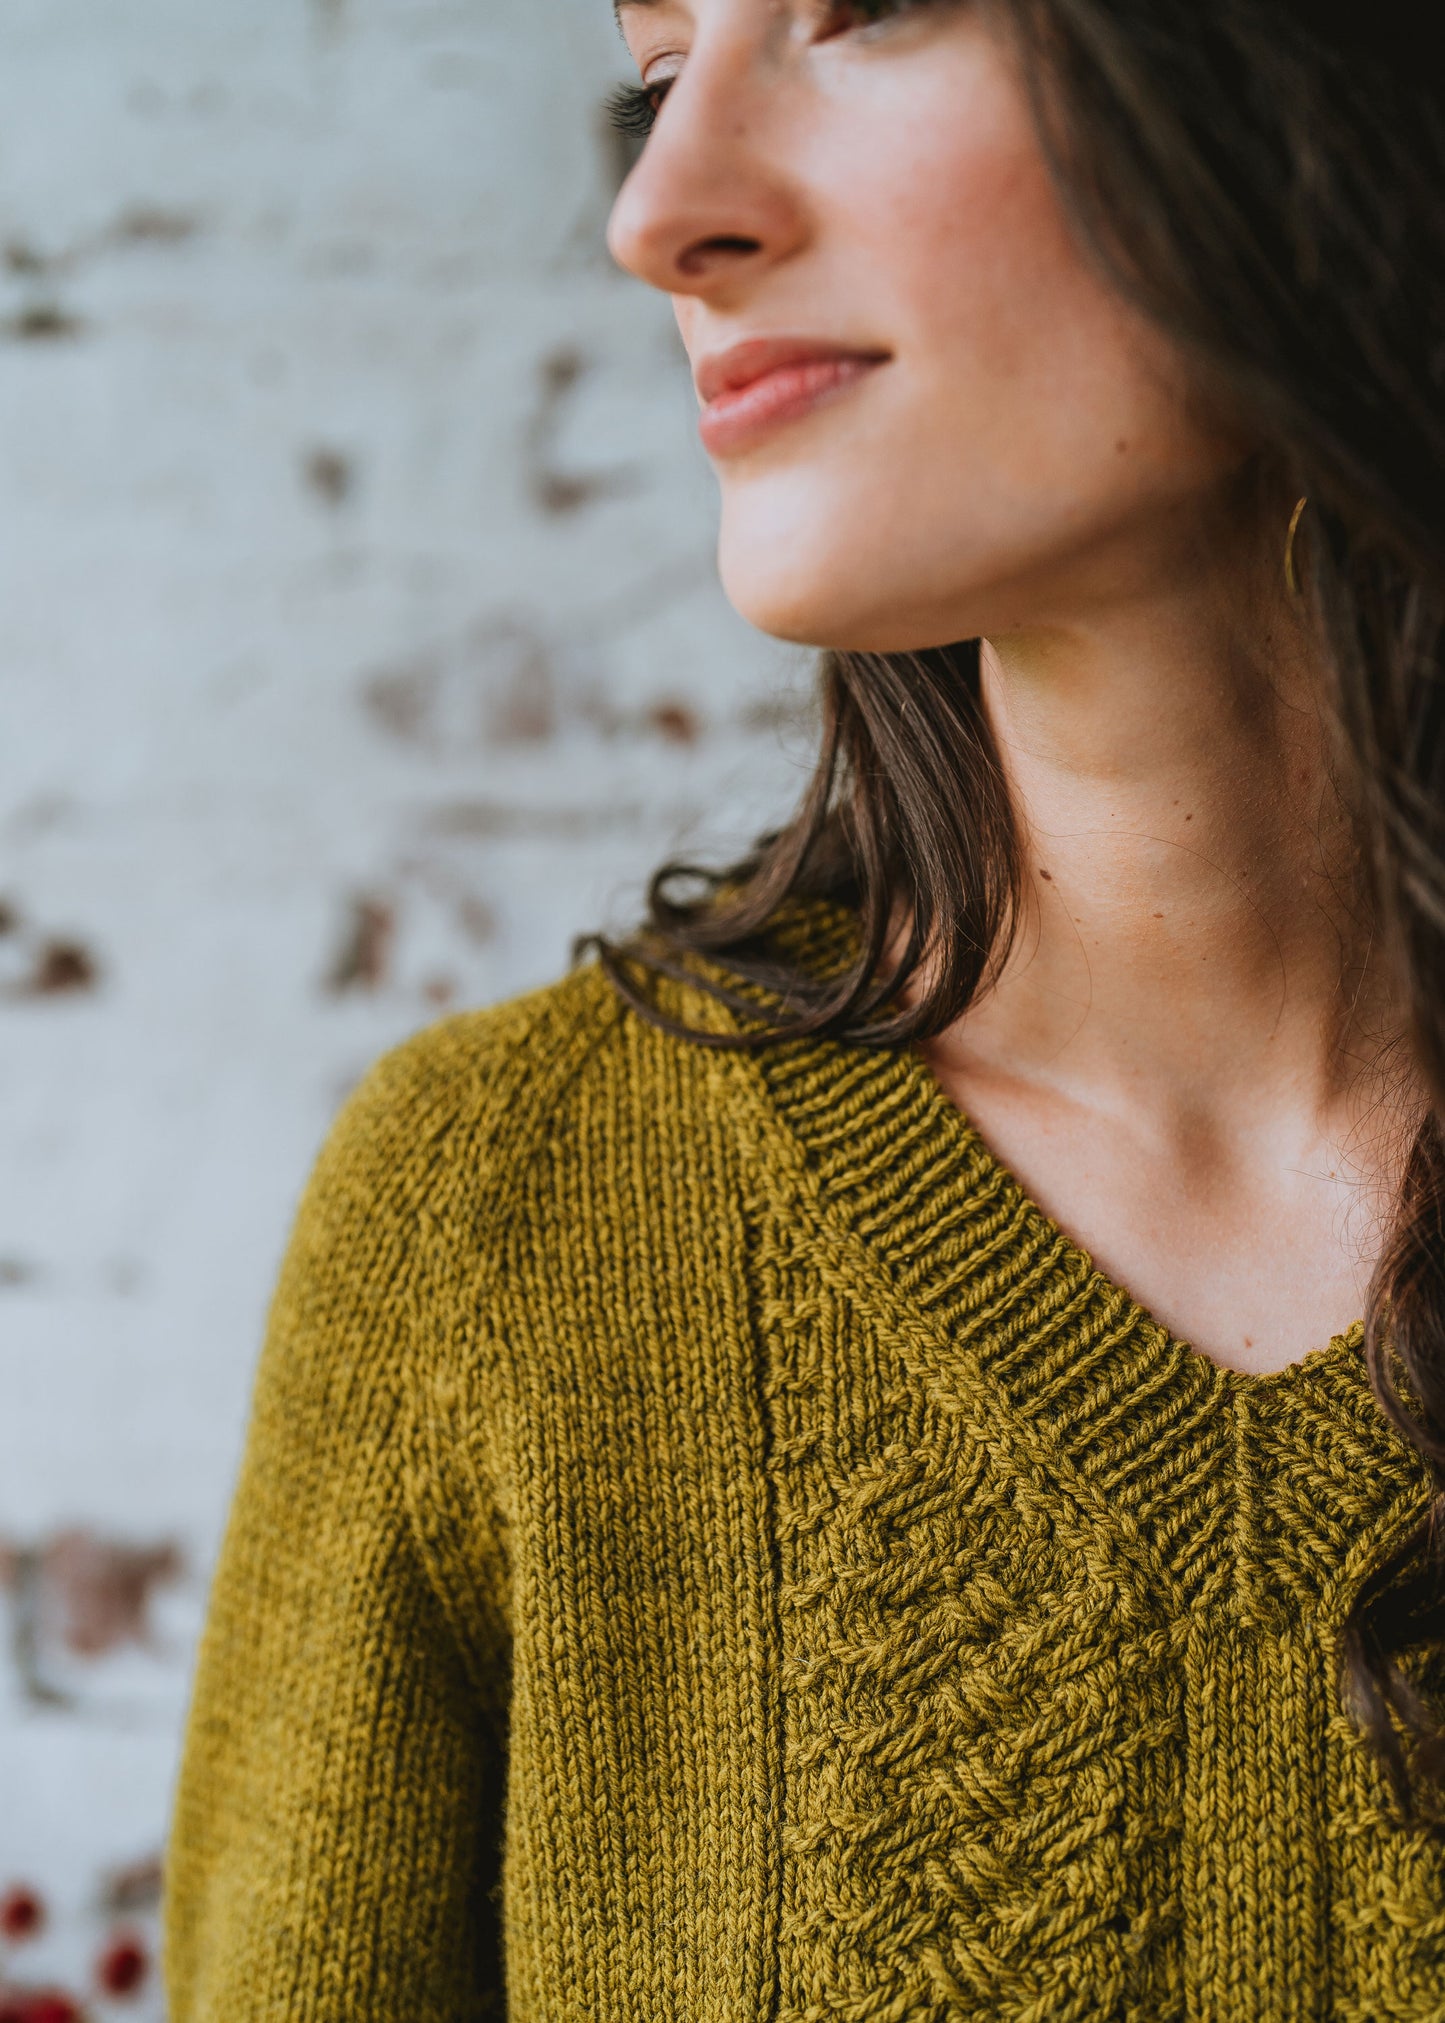 Seen from close up, Laura looks off camera, wearing a golden colored hand knit sweater. The sweater is knit up with cable details and a V-neck.